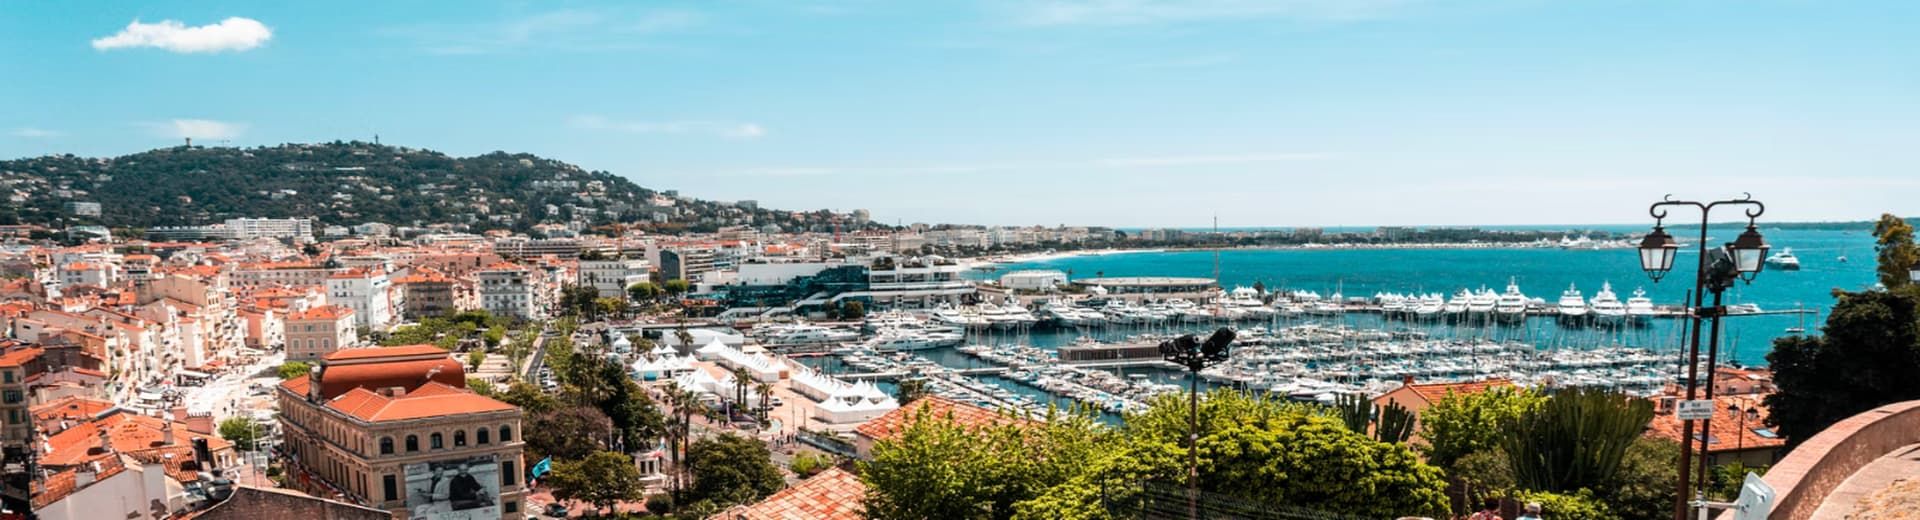 French Riviera Yacht Charter, French Riviera Super Yachts, France yachts